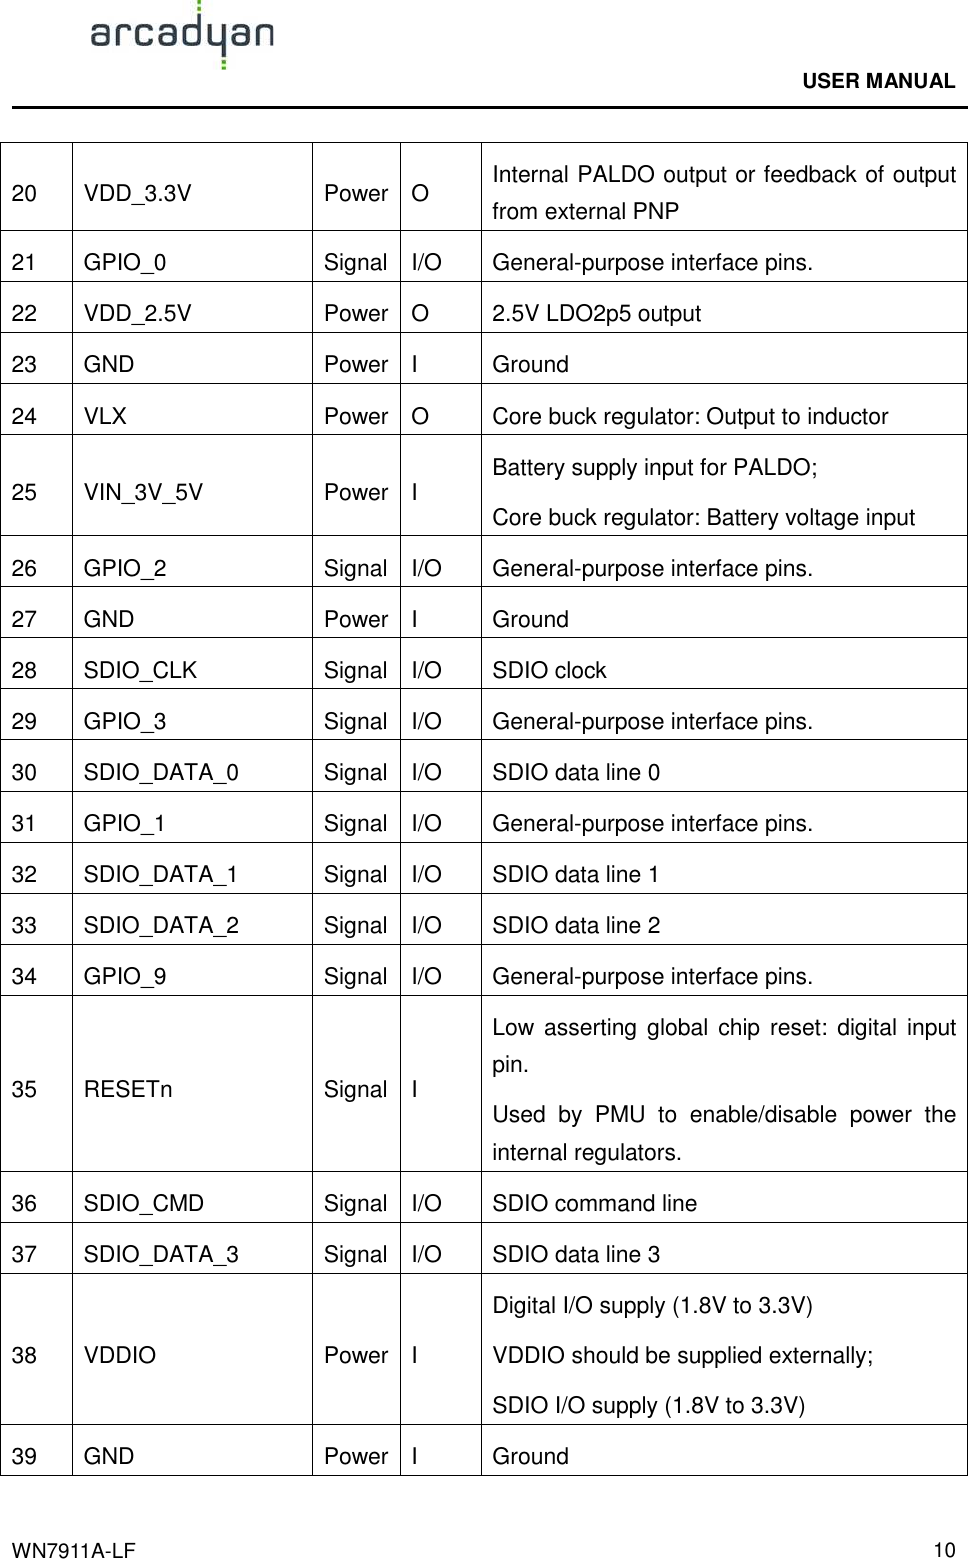                                              USER MANUAL                                              WN7911A-LF  1020  VDD_3.3V  Power O  Internal PALDO output or feedback of output from external PNP 21  GPIO_0  Signal I/O  General-purpose interface pins. 22  VDD_2.5V  Power O  2.5V LDO2p5 output 23  GND  Power I  Ground   24  VLX  Power O  Core buck regulator: Output to inductor 25  VIN_3V_5V  Power I  Battery supply input for PALDO;   Core buck regulator: Battery voltage input 26  GPIO_2  Signal I/O  General-purpose interface pins. 27  GND  Power I  Ground   28  SDIO_CLK  Signal I/O  SDIO clock 29  GPIO_3  Signal I/O  General-purpose interface pins. 30  SDIO_DATA_0  Signal I/O  SDIO data line 0 31  GPIO_1  Signal I/O  General-purpose interface pins. 32  SDIO_DATA_1  Signal I/O  SDIO data line 1 33  SDIO_DATA_2  Signal I/O  SDIO data line 2 34  GPIO_9  Signal I/O  General-purpose interface pins. 35  RESETn  Signal I Low asserting  global chip  reset:  digital  input pin. Used  by  PMU  to  enable/disable  power  the internal regulators. 36  SDIO_CMD  Signal I/O  SDIO command line 37  SDIO_DATA_3  Signal I/O  SDIO data line 3 38  VDDIO  Power I Digital I/O supply (1.8V to 3.3V) VDDIO should be supplied externally; SDIO I/O supply (1.8V to 3.3V) 39  GND  Power I  Ground   